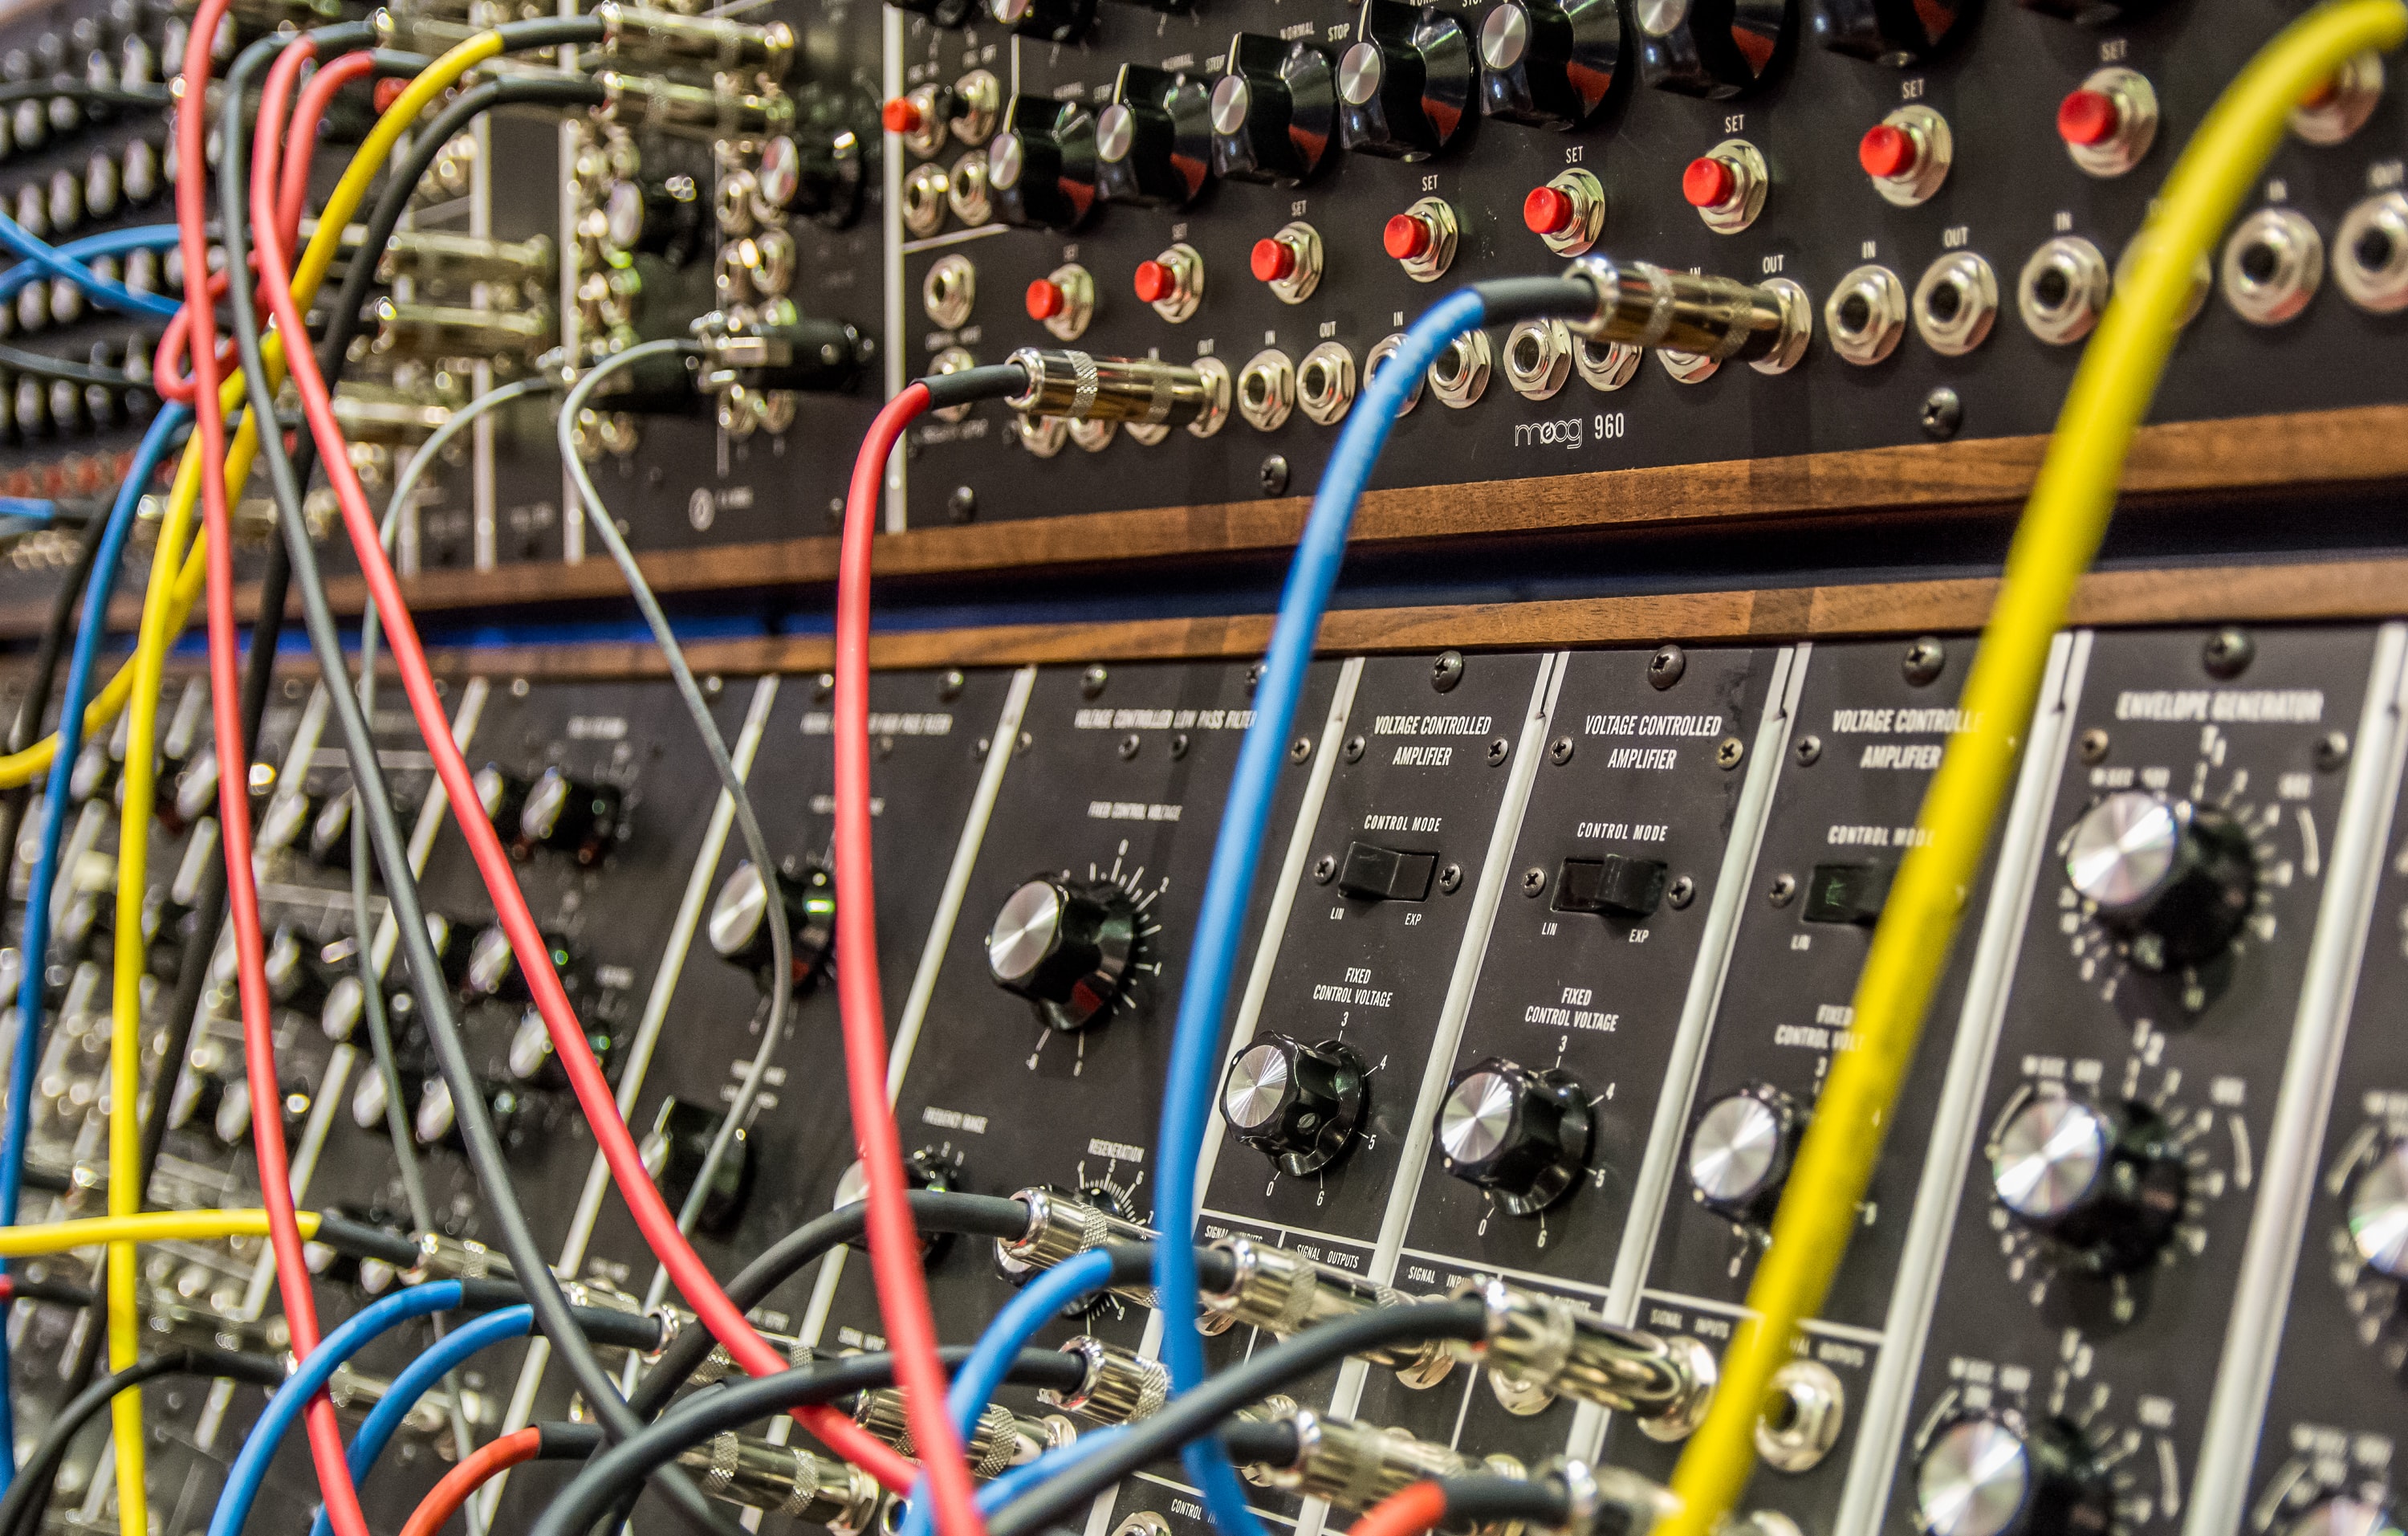 A close-up of a Moog modular synthesizer with dozens of blue, red, yellow and black patch cables plugged in.